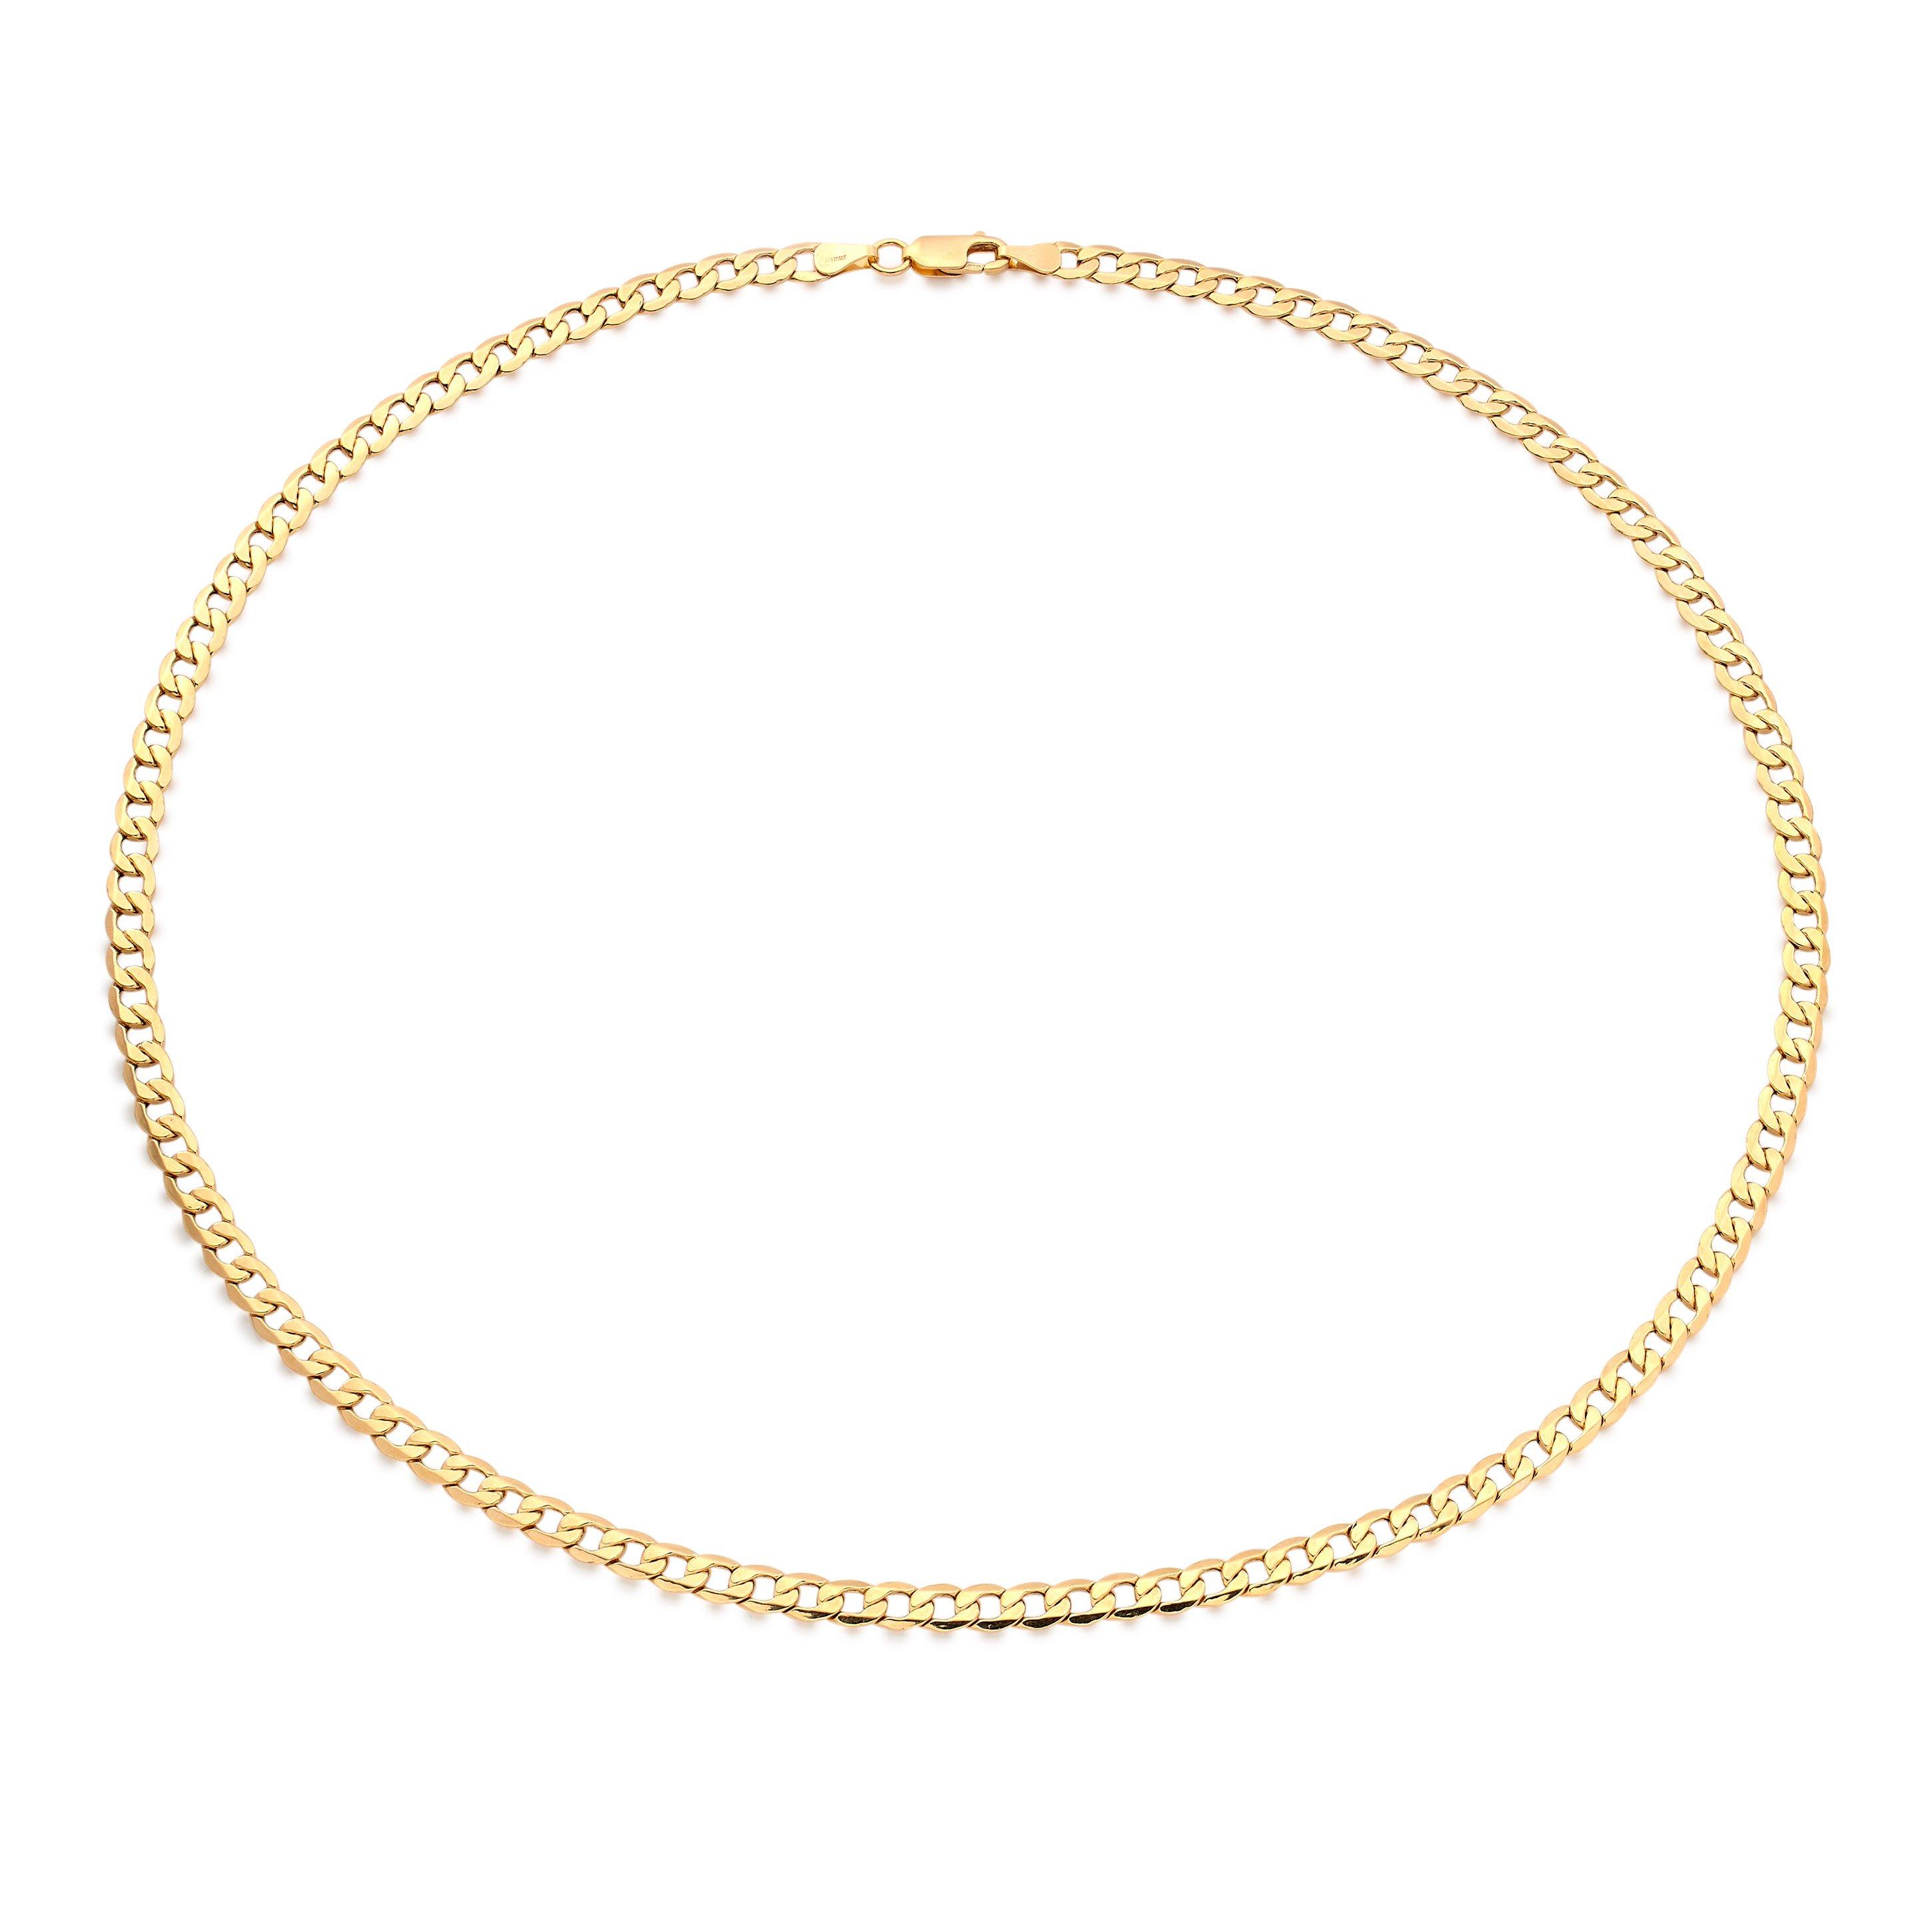 9ct Yellow Gold Curb Chain | 0131386 | Beaverbrooks the Jewellers